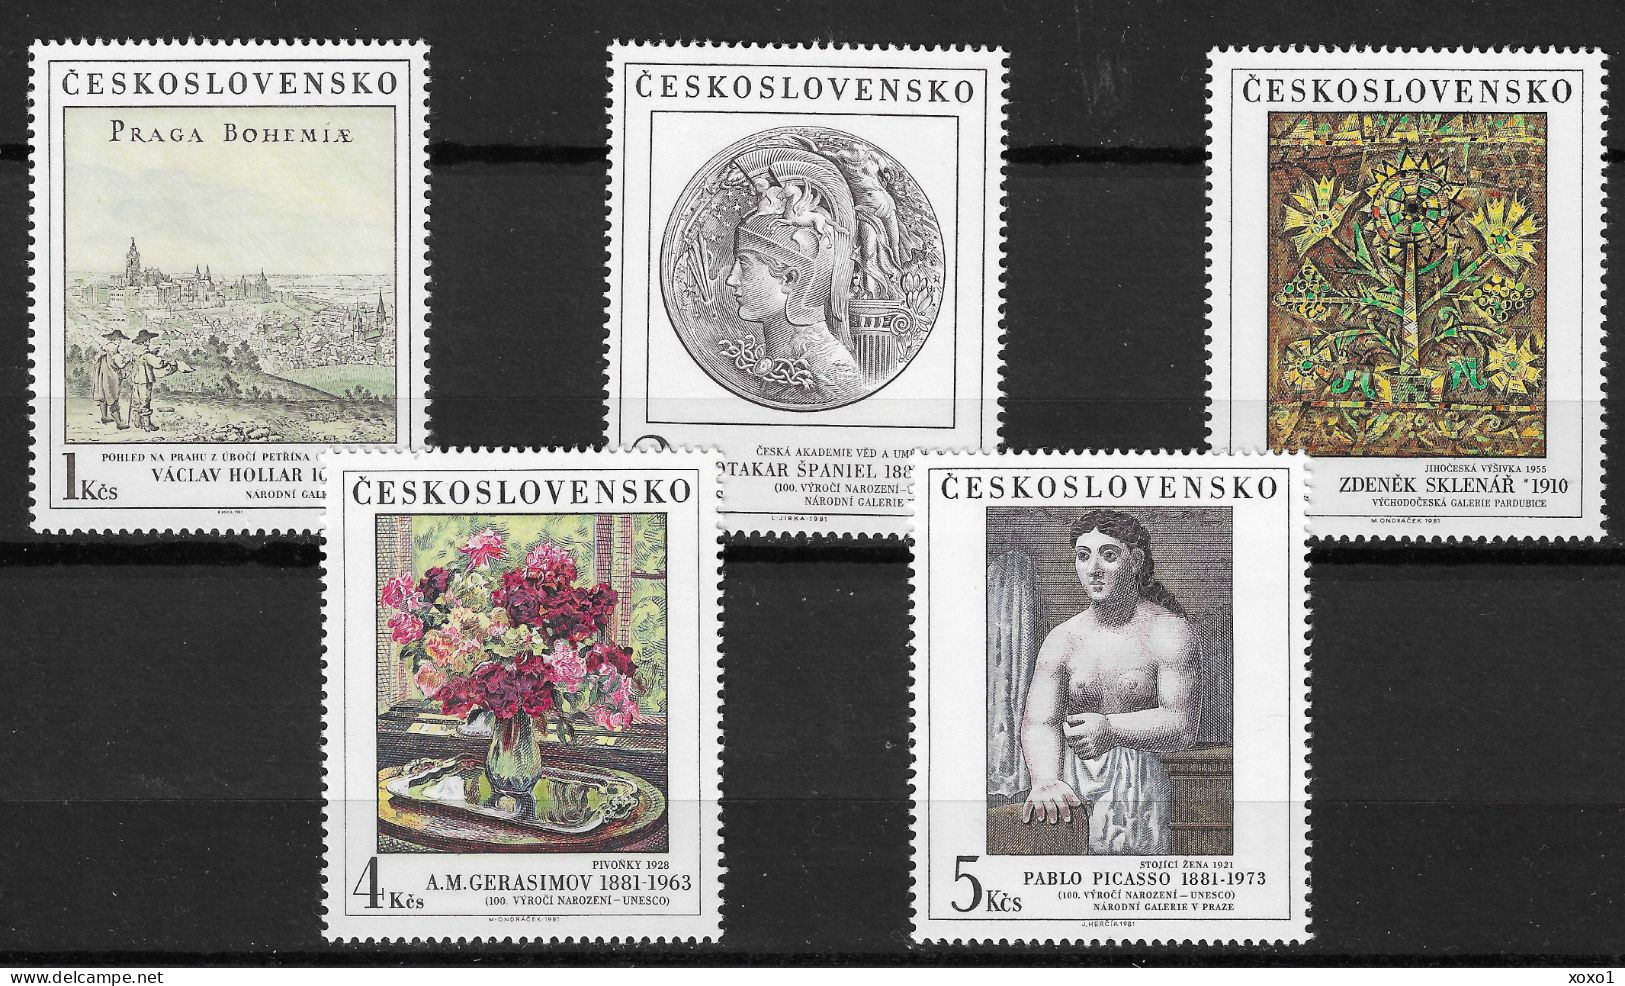 Czechoslovakia 1981 MiNr. 2641 - 2645 National Galleries (XV) Art, Painting, Picasso 5V  MNH**  6.00 € - Unused Stamps